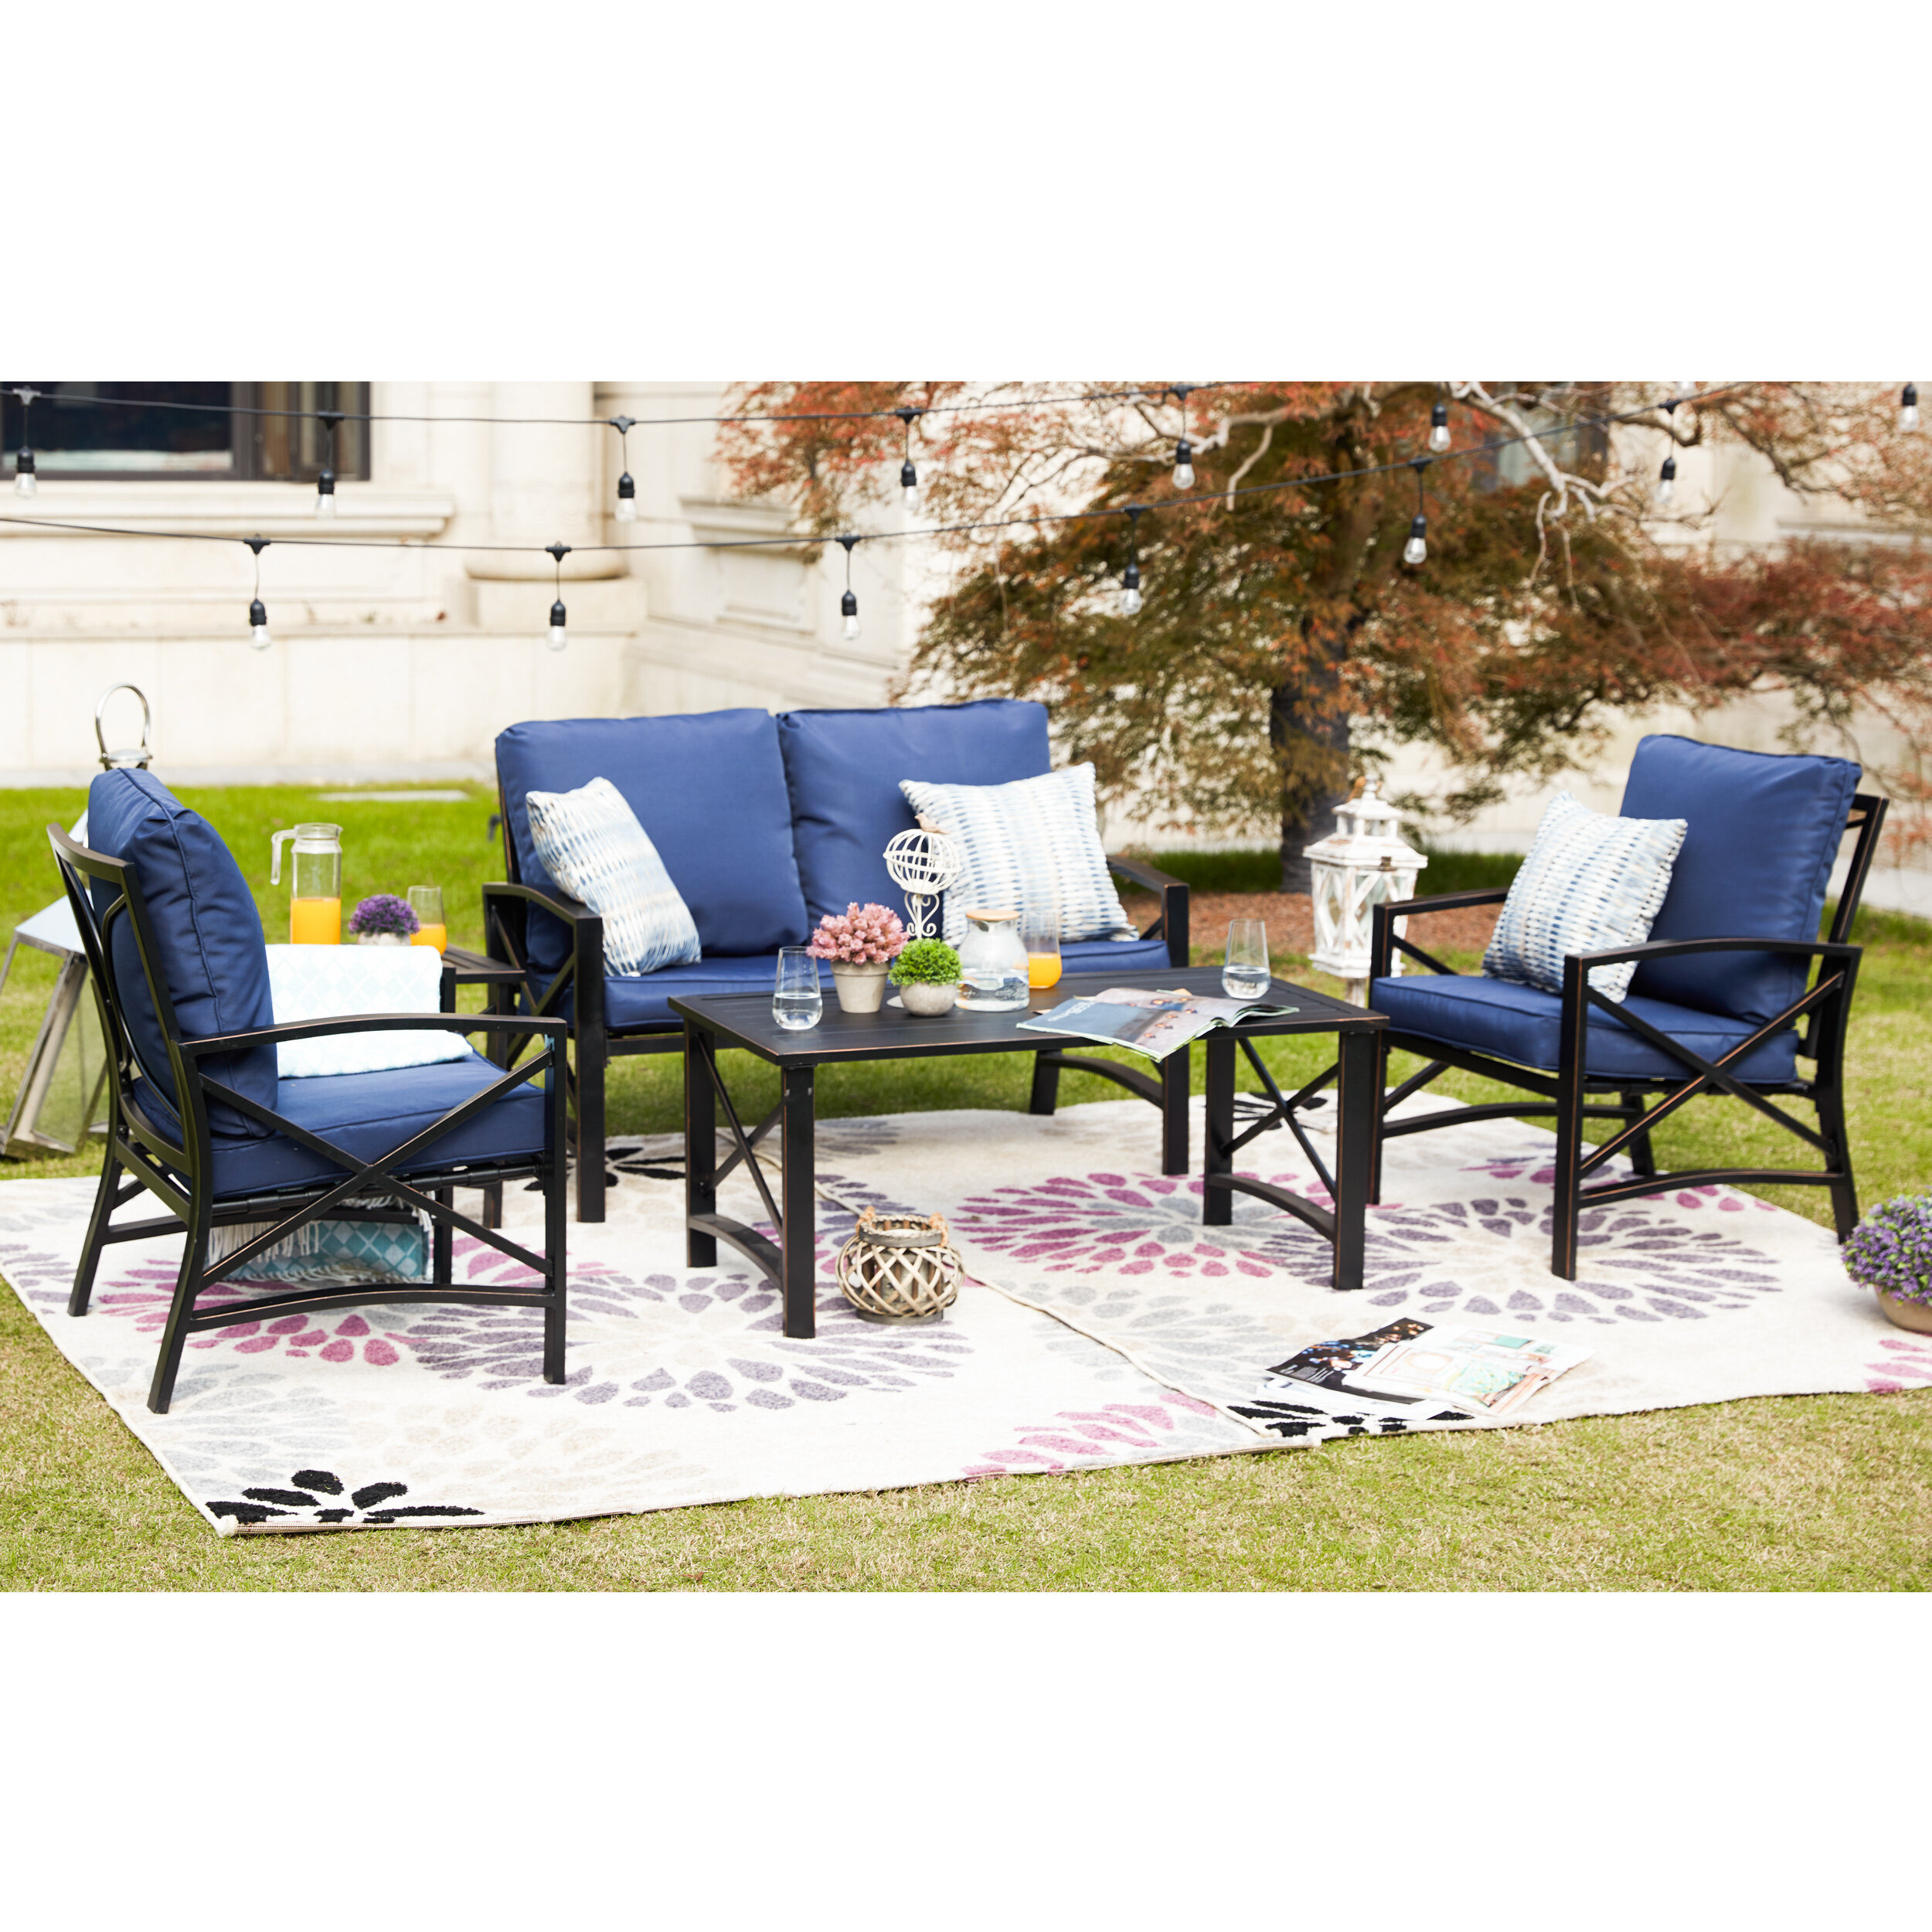 Charlton Home® Person | & Straughter Group Cushions Reviews Outdoor Wayfair Seating with 4 